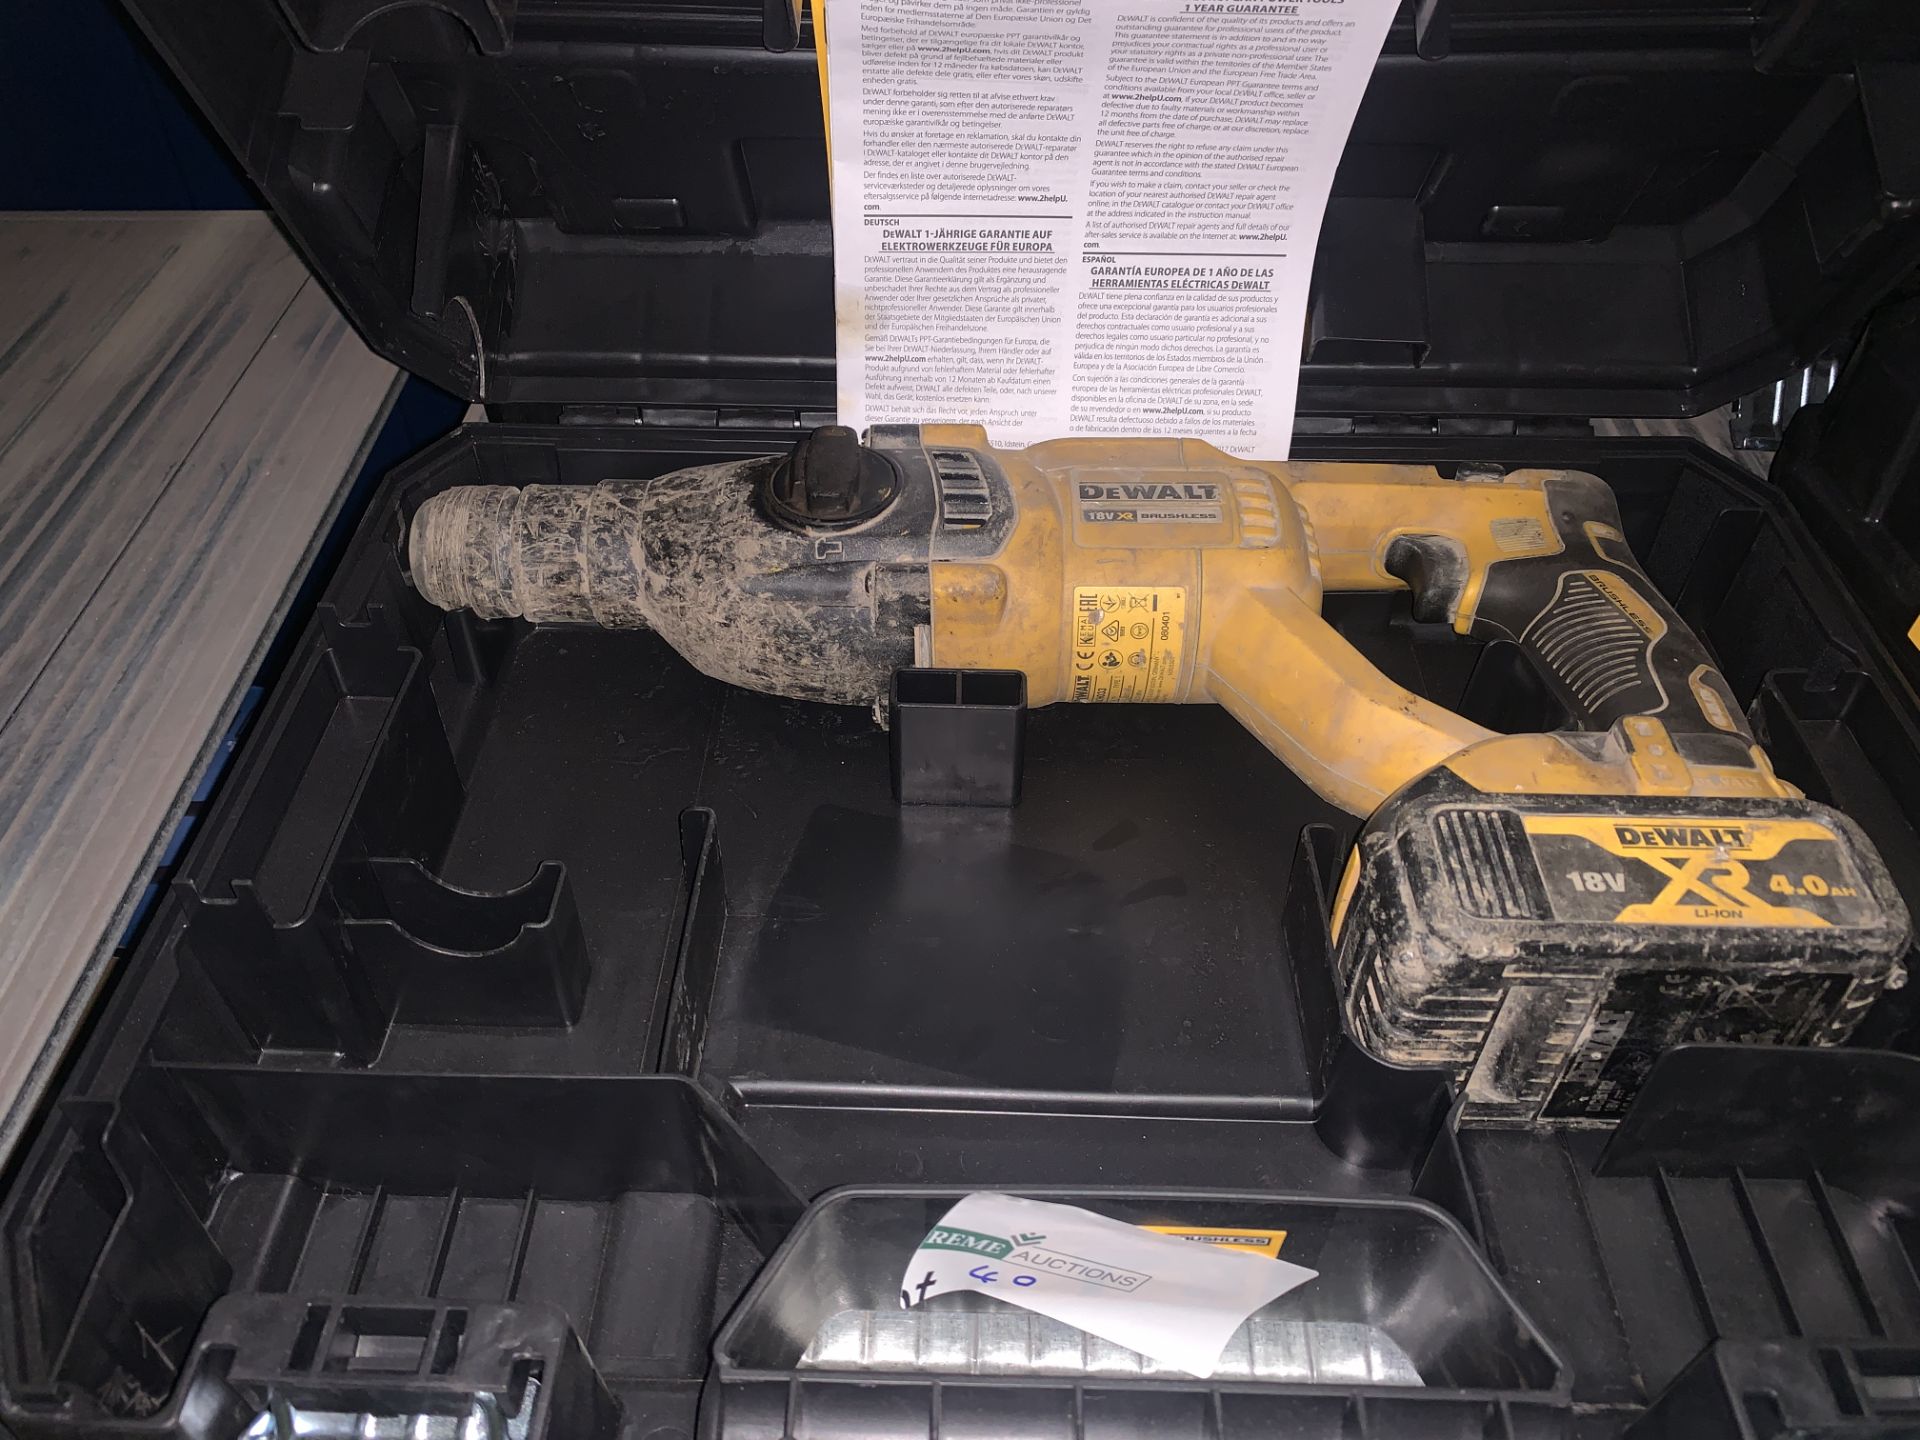 DEWALT DCH033 3KG 18V 4.0AH LI-ION XR BRUSHLESS CORDLESS SDS PLUS DRILL COMES WITH BATTERY AND CARRY